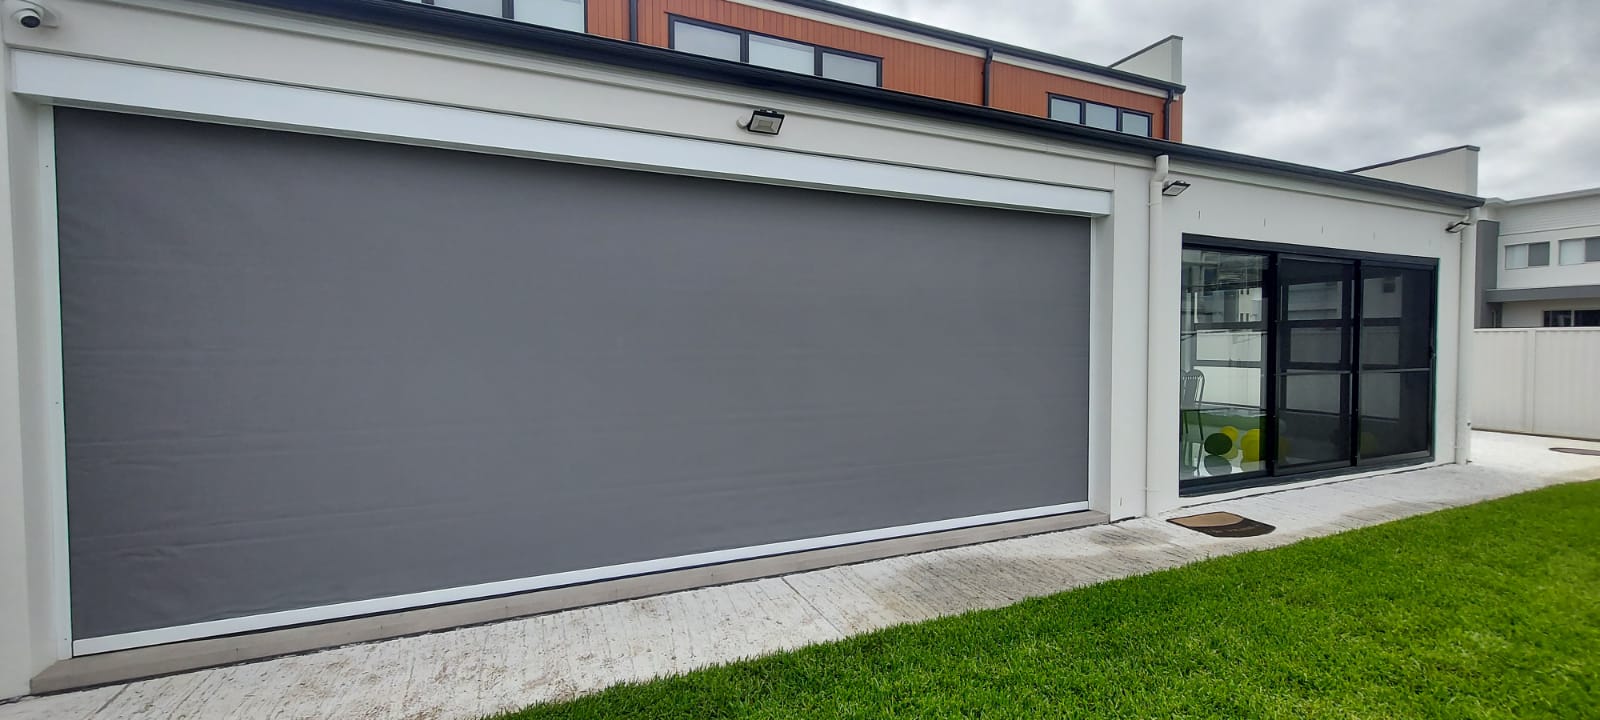 Closed Outdoor Blinds in Grey colour